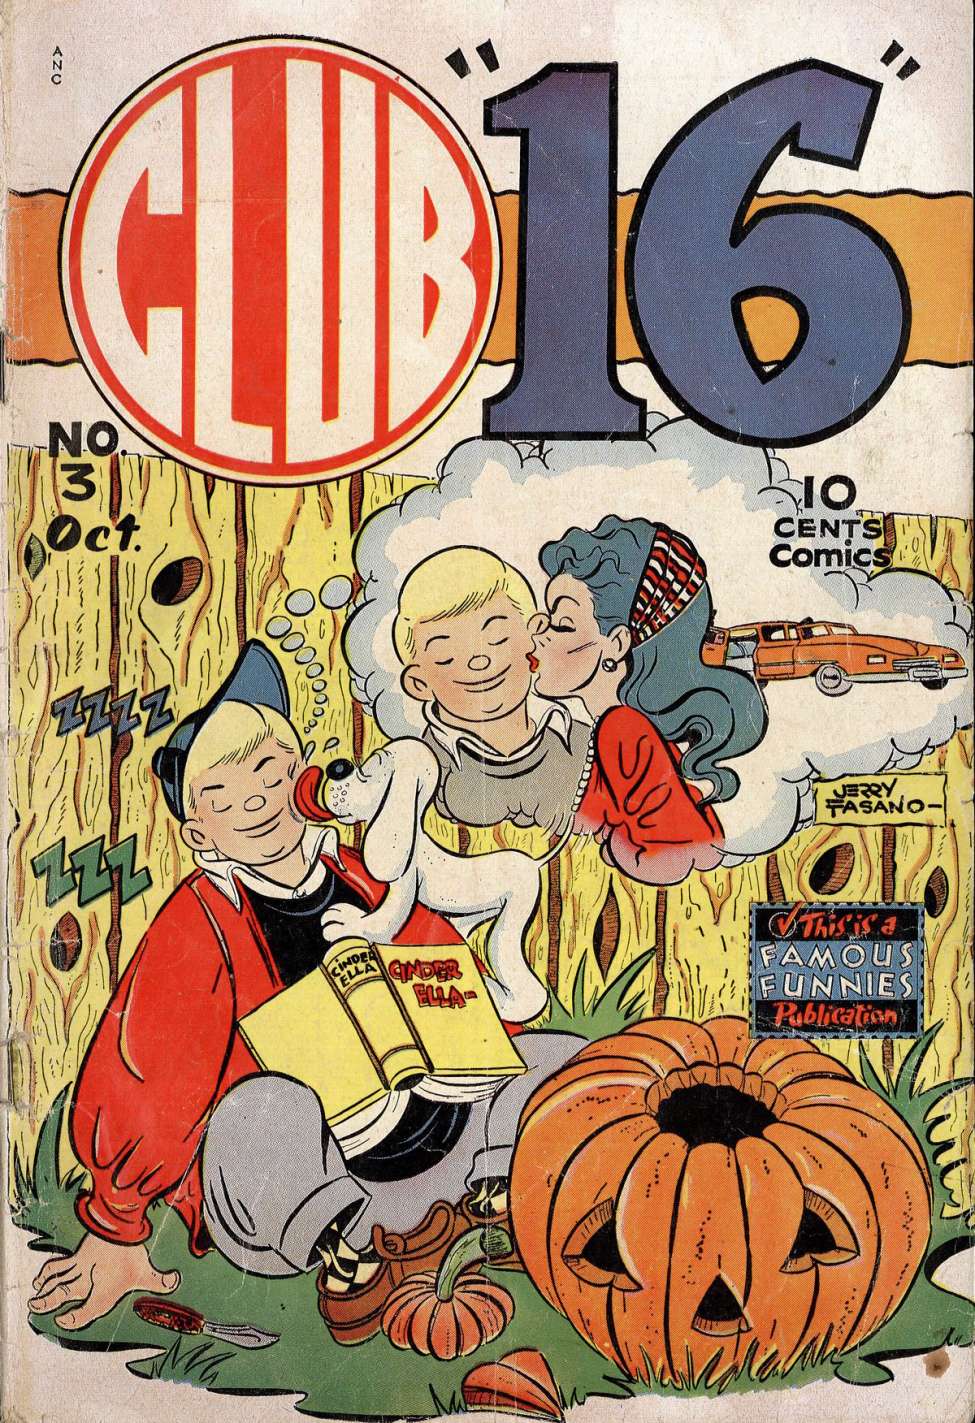 Comic Book Cover For Club 16 3